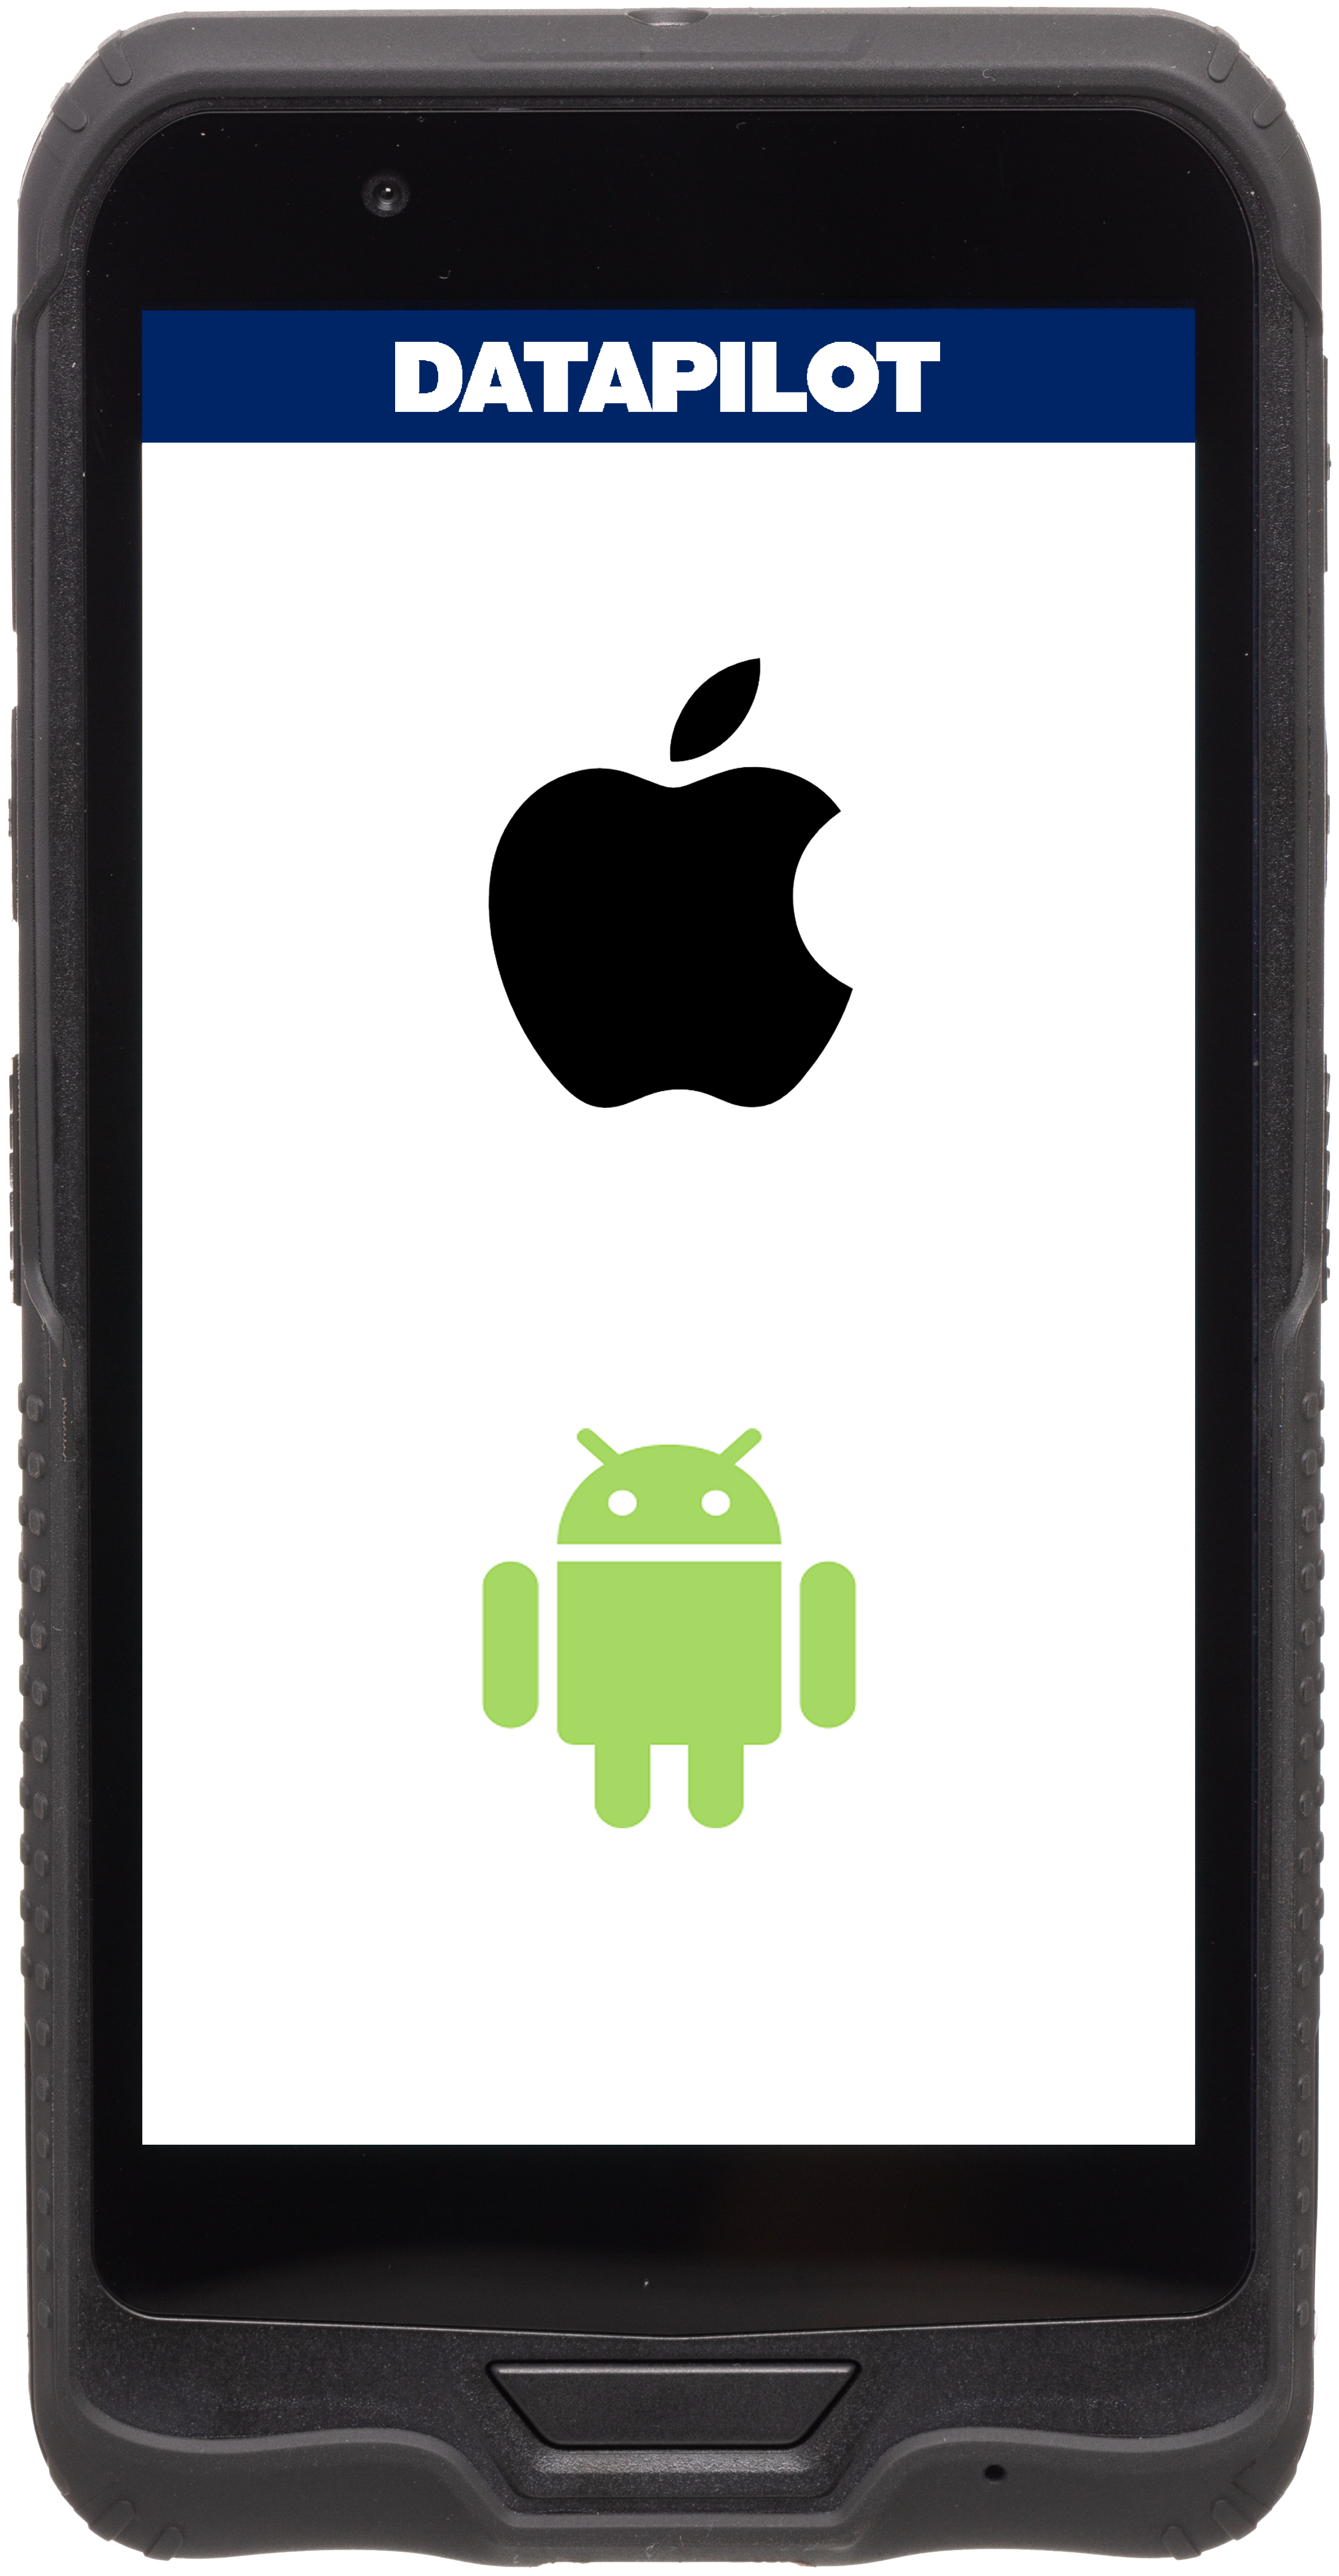 A picture of an iphone and android.